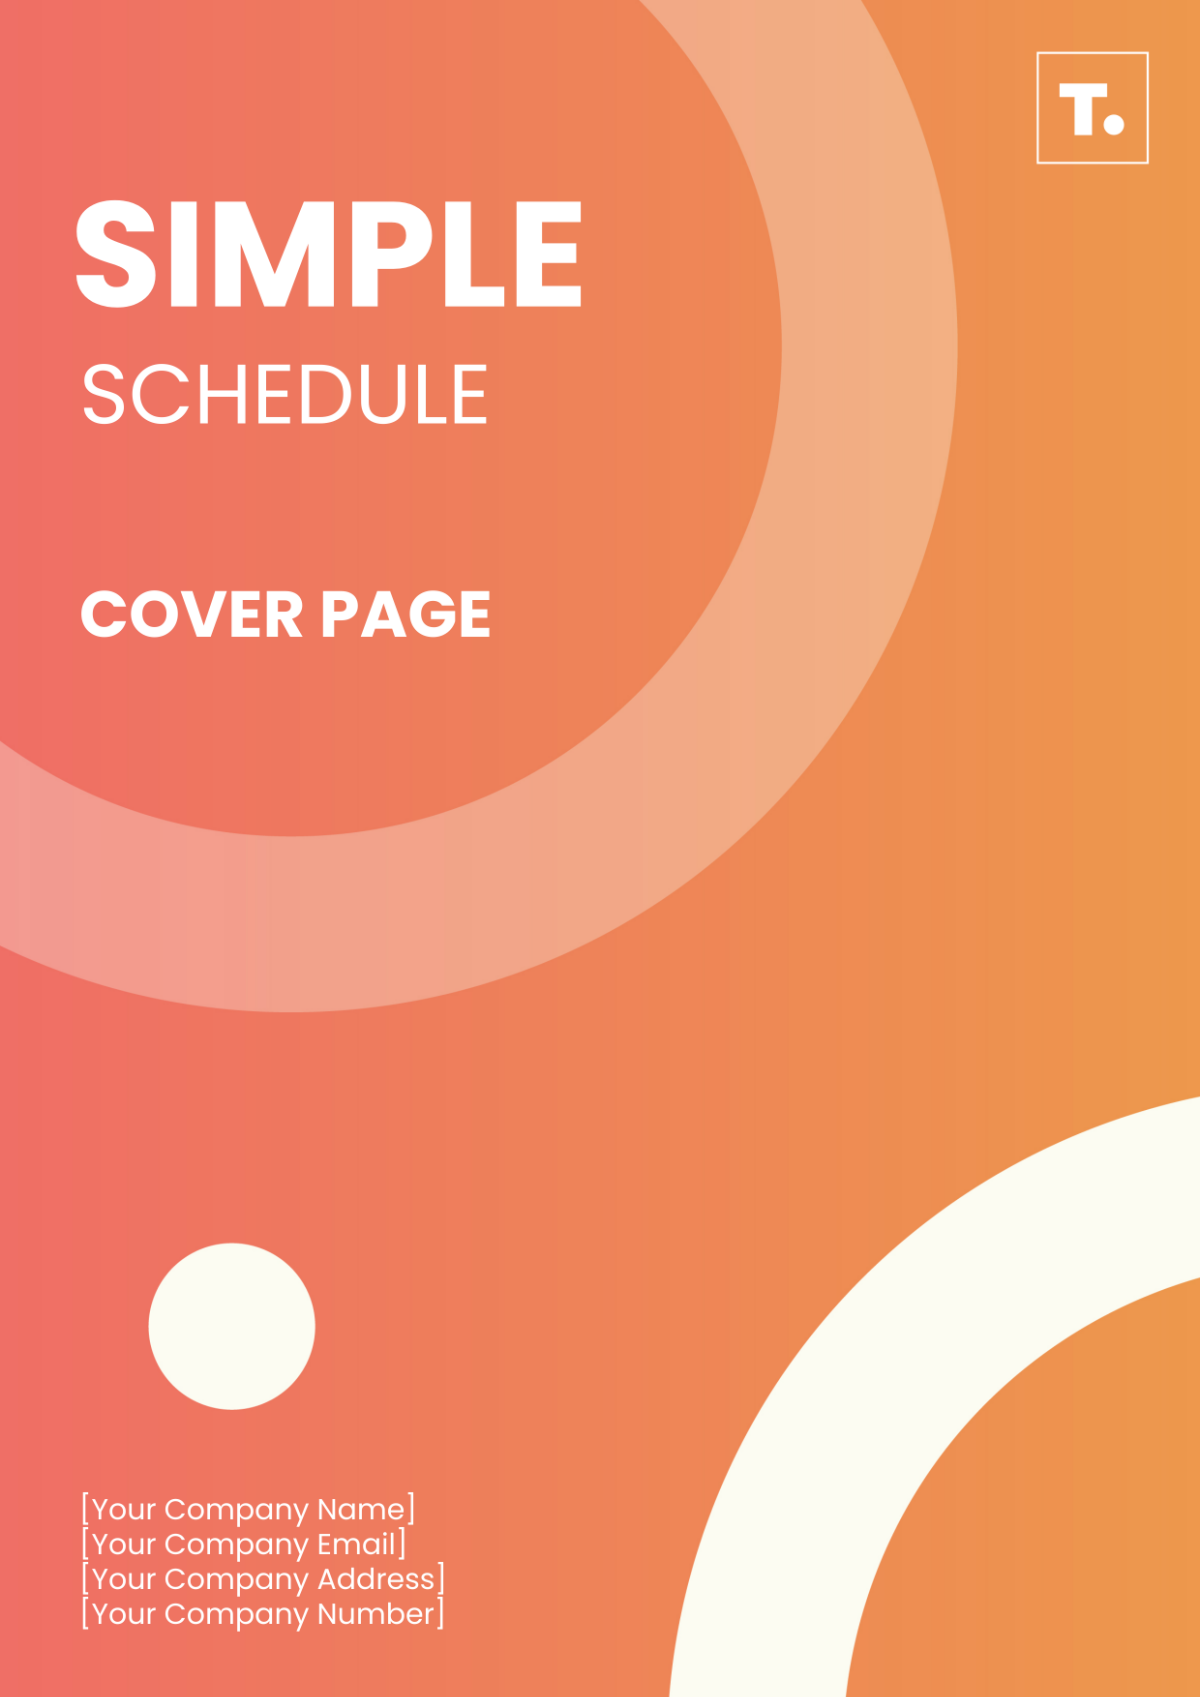 Simple Schedule Cover Page